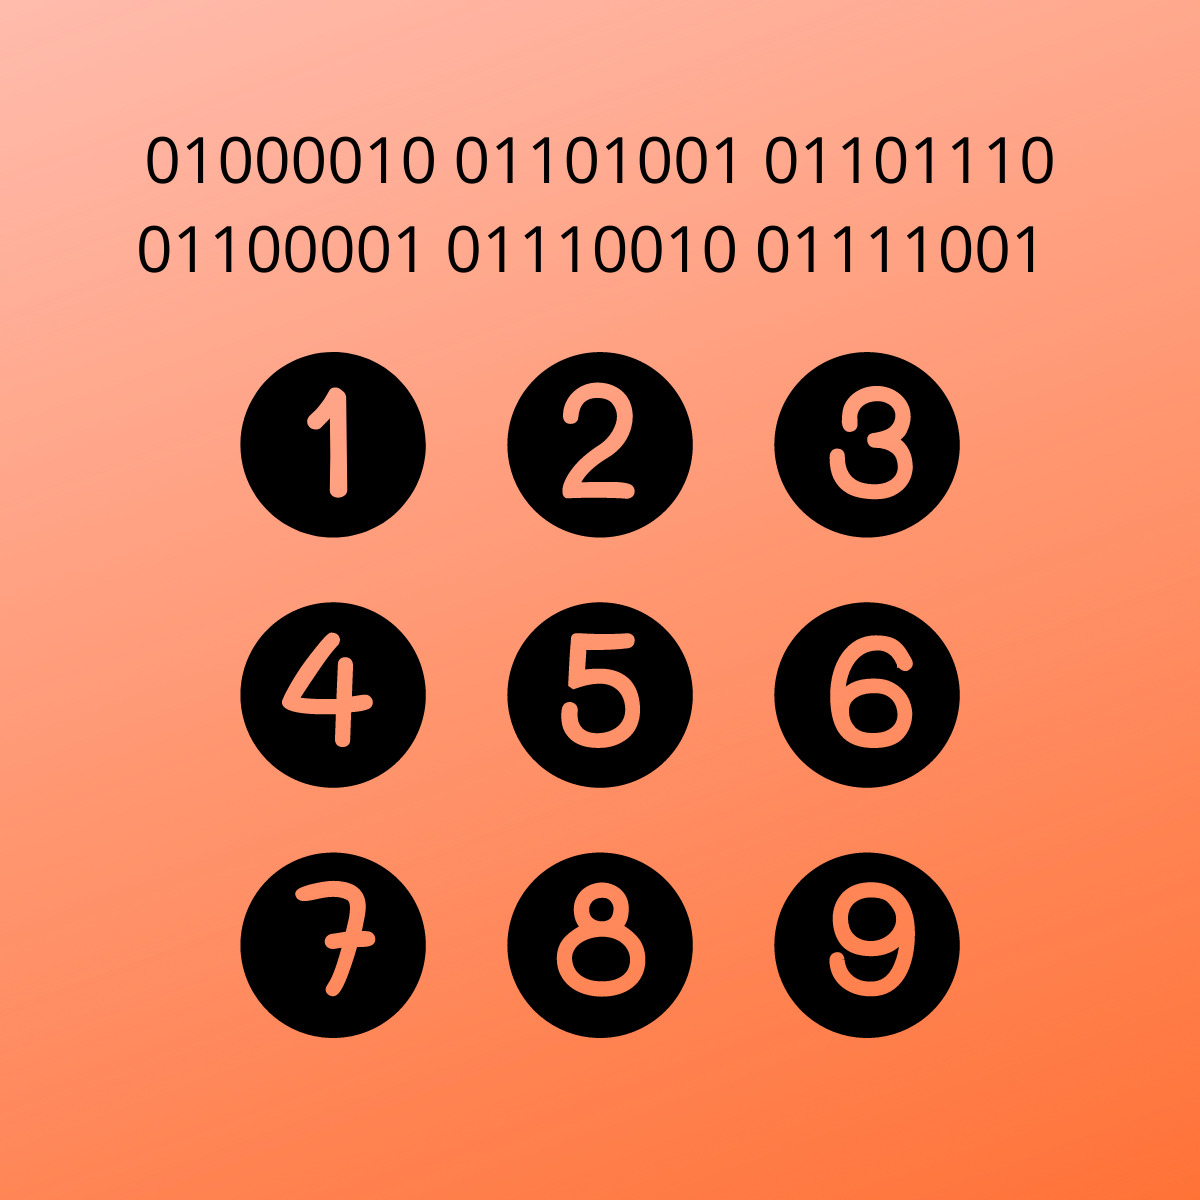 Table / List of Binary Numbers ▶️ from 0 to 100